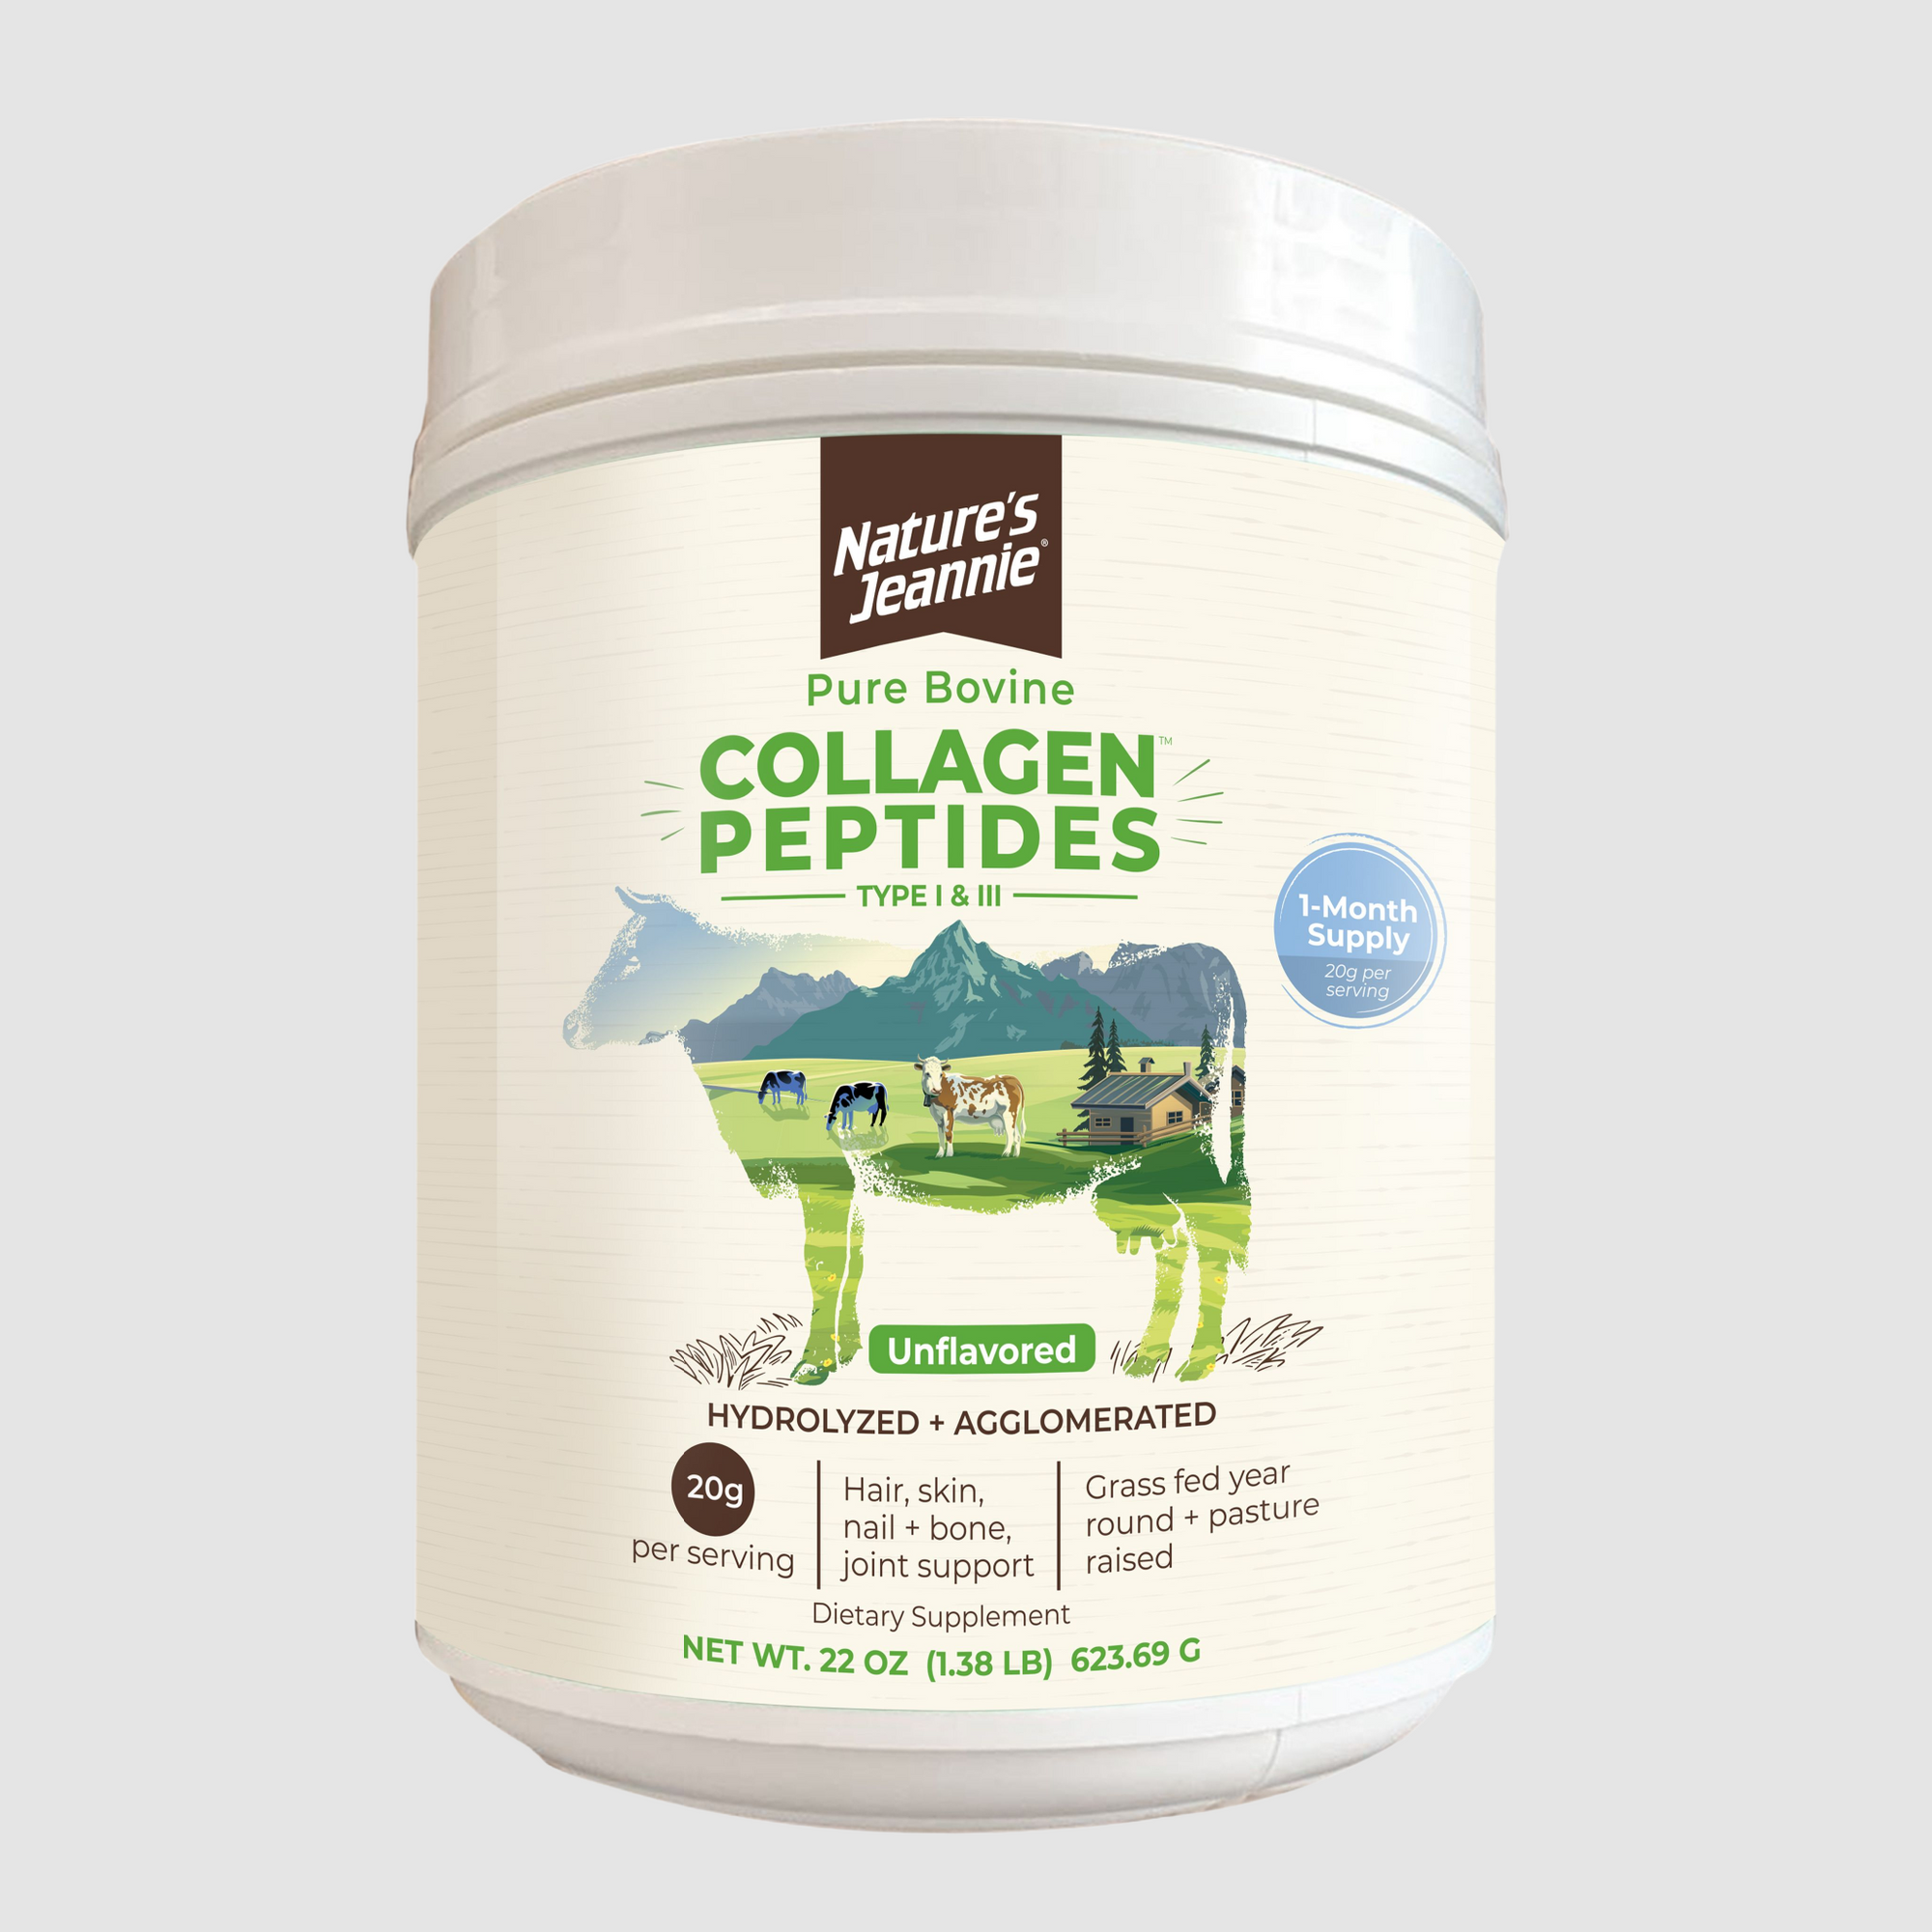 Nature's Jeannie 22 oz Pure Collagen Peptides Type I & III product cannister.